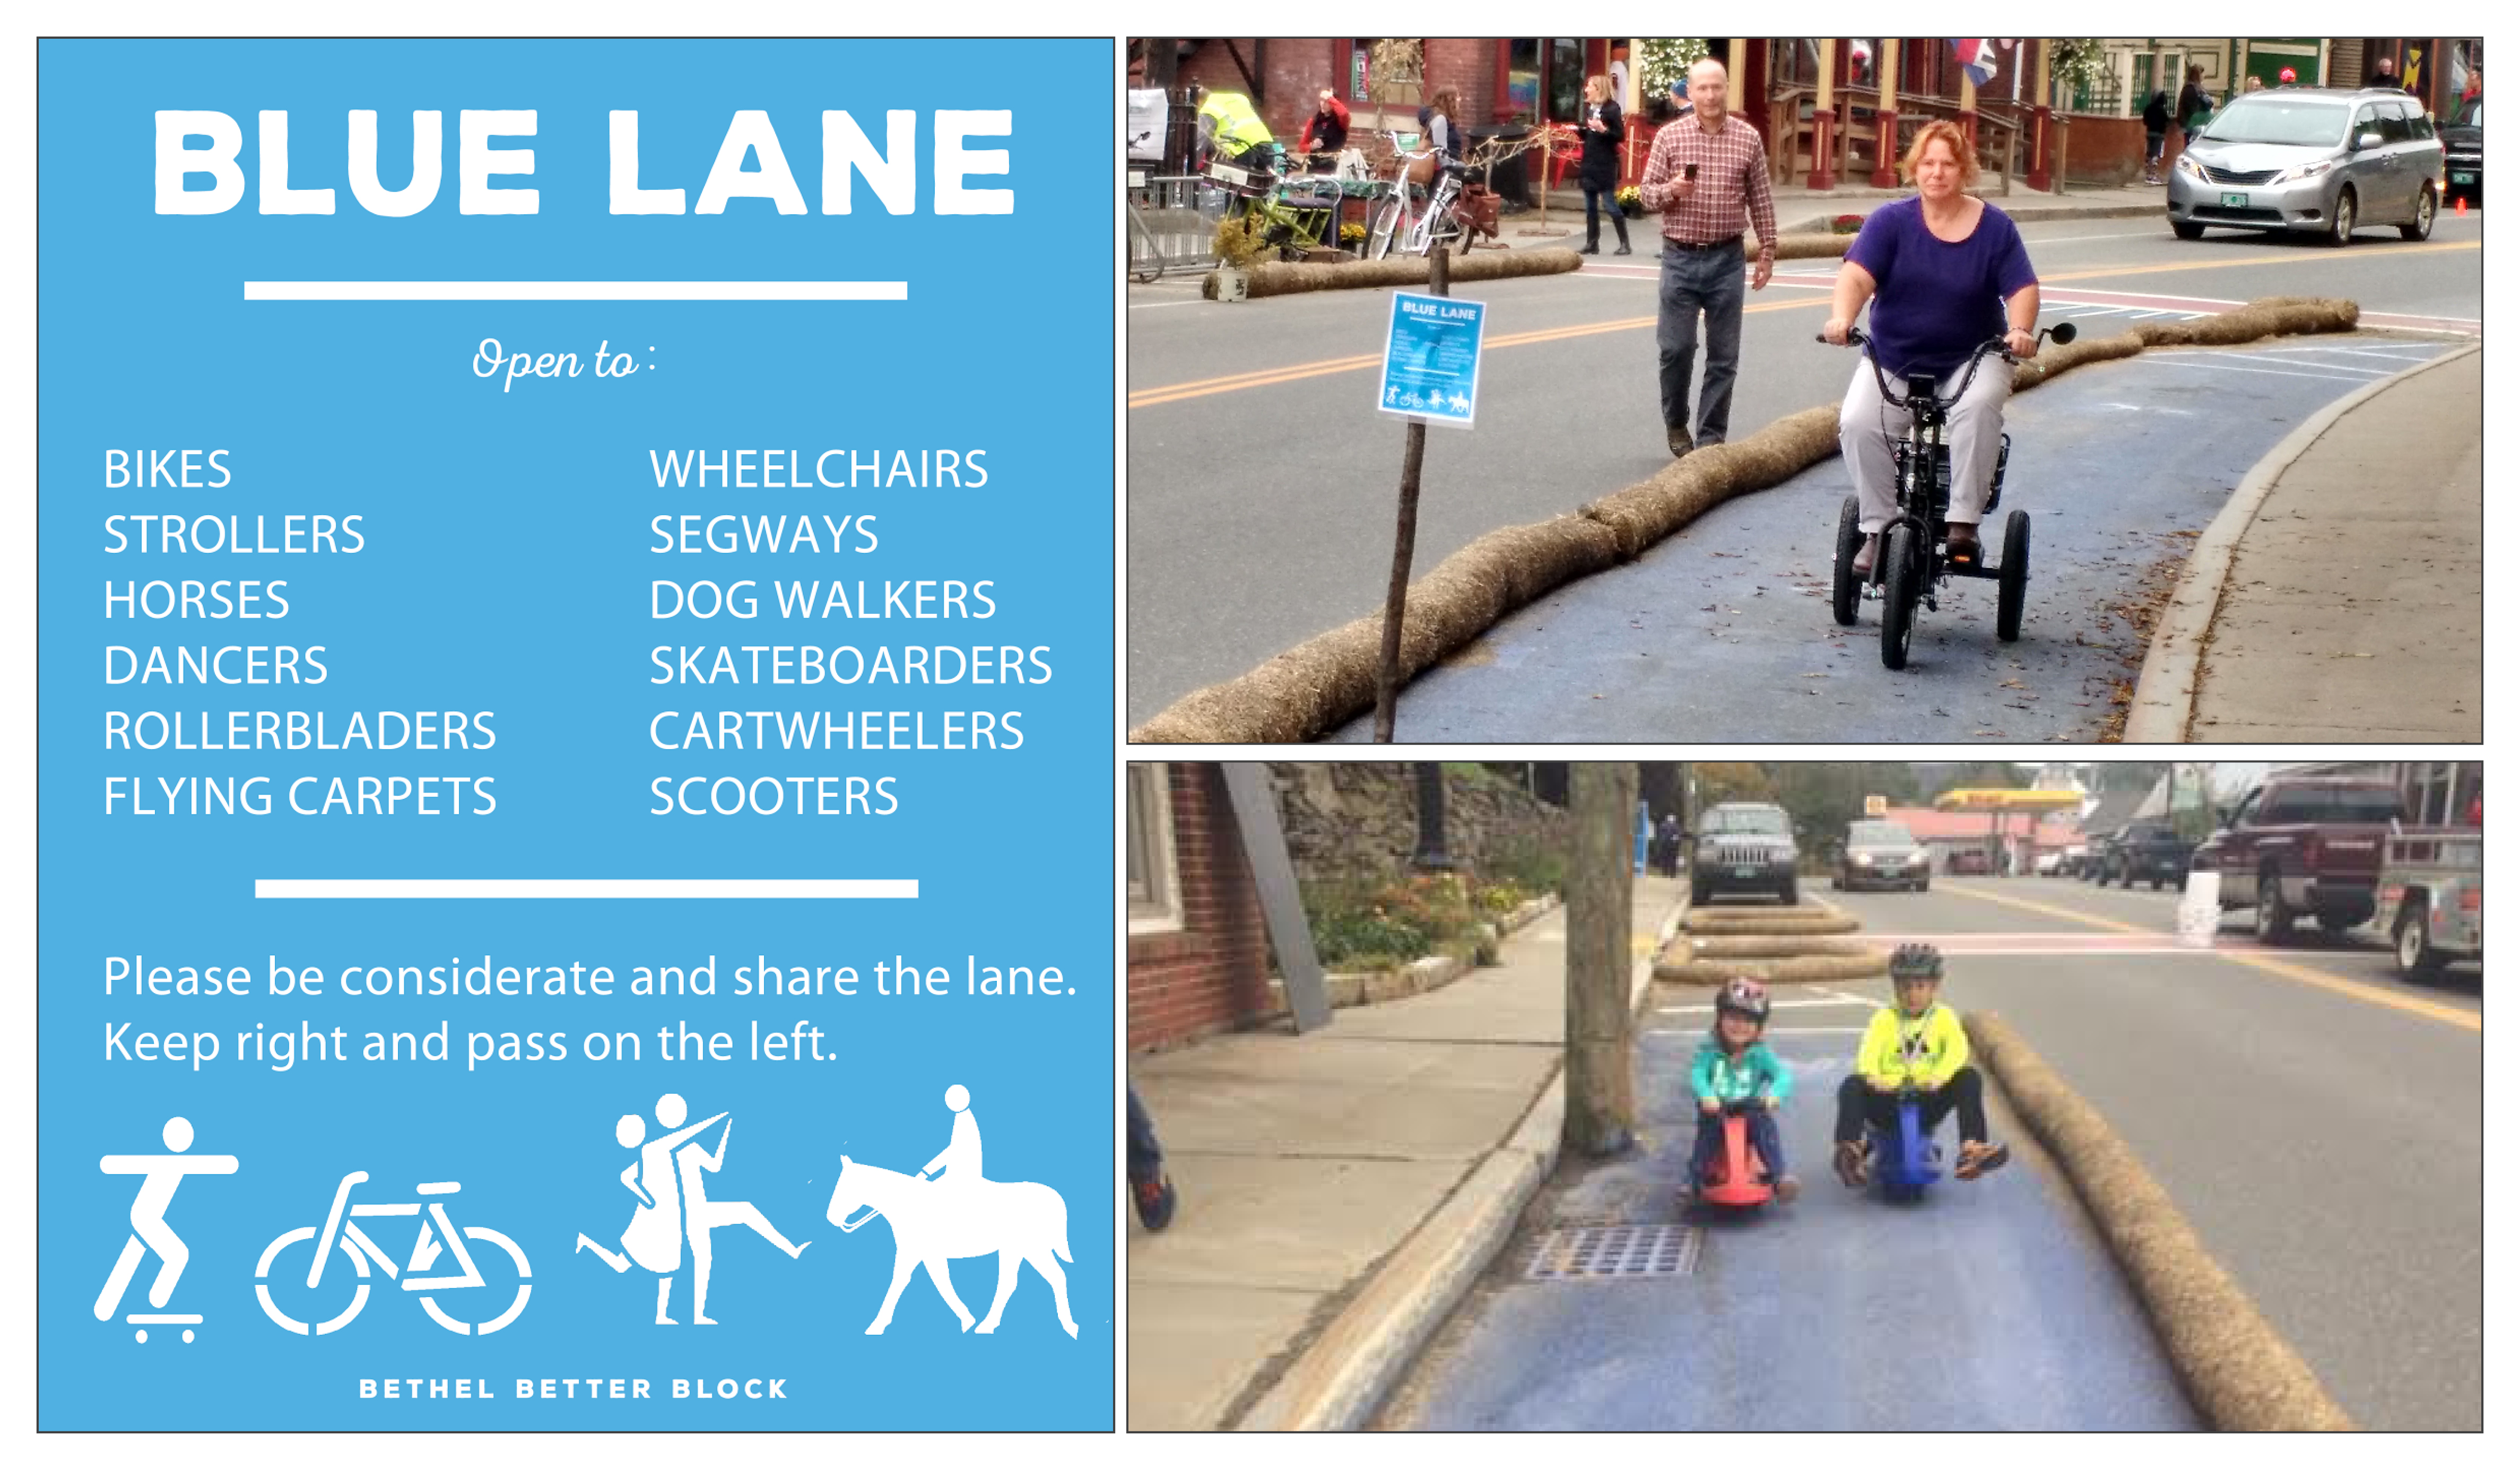 A blue poster describes the Blue Lane and three tricyclists, both older and young, show how the lane can be used.